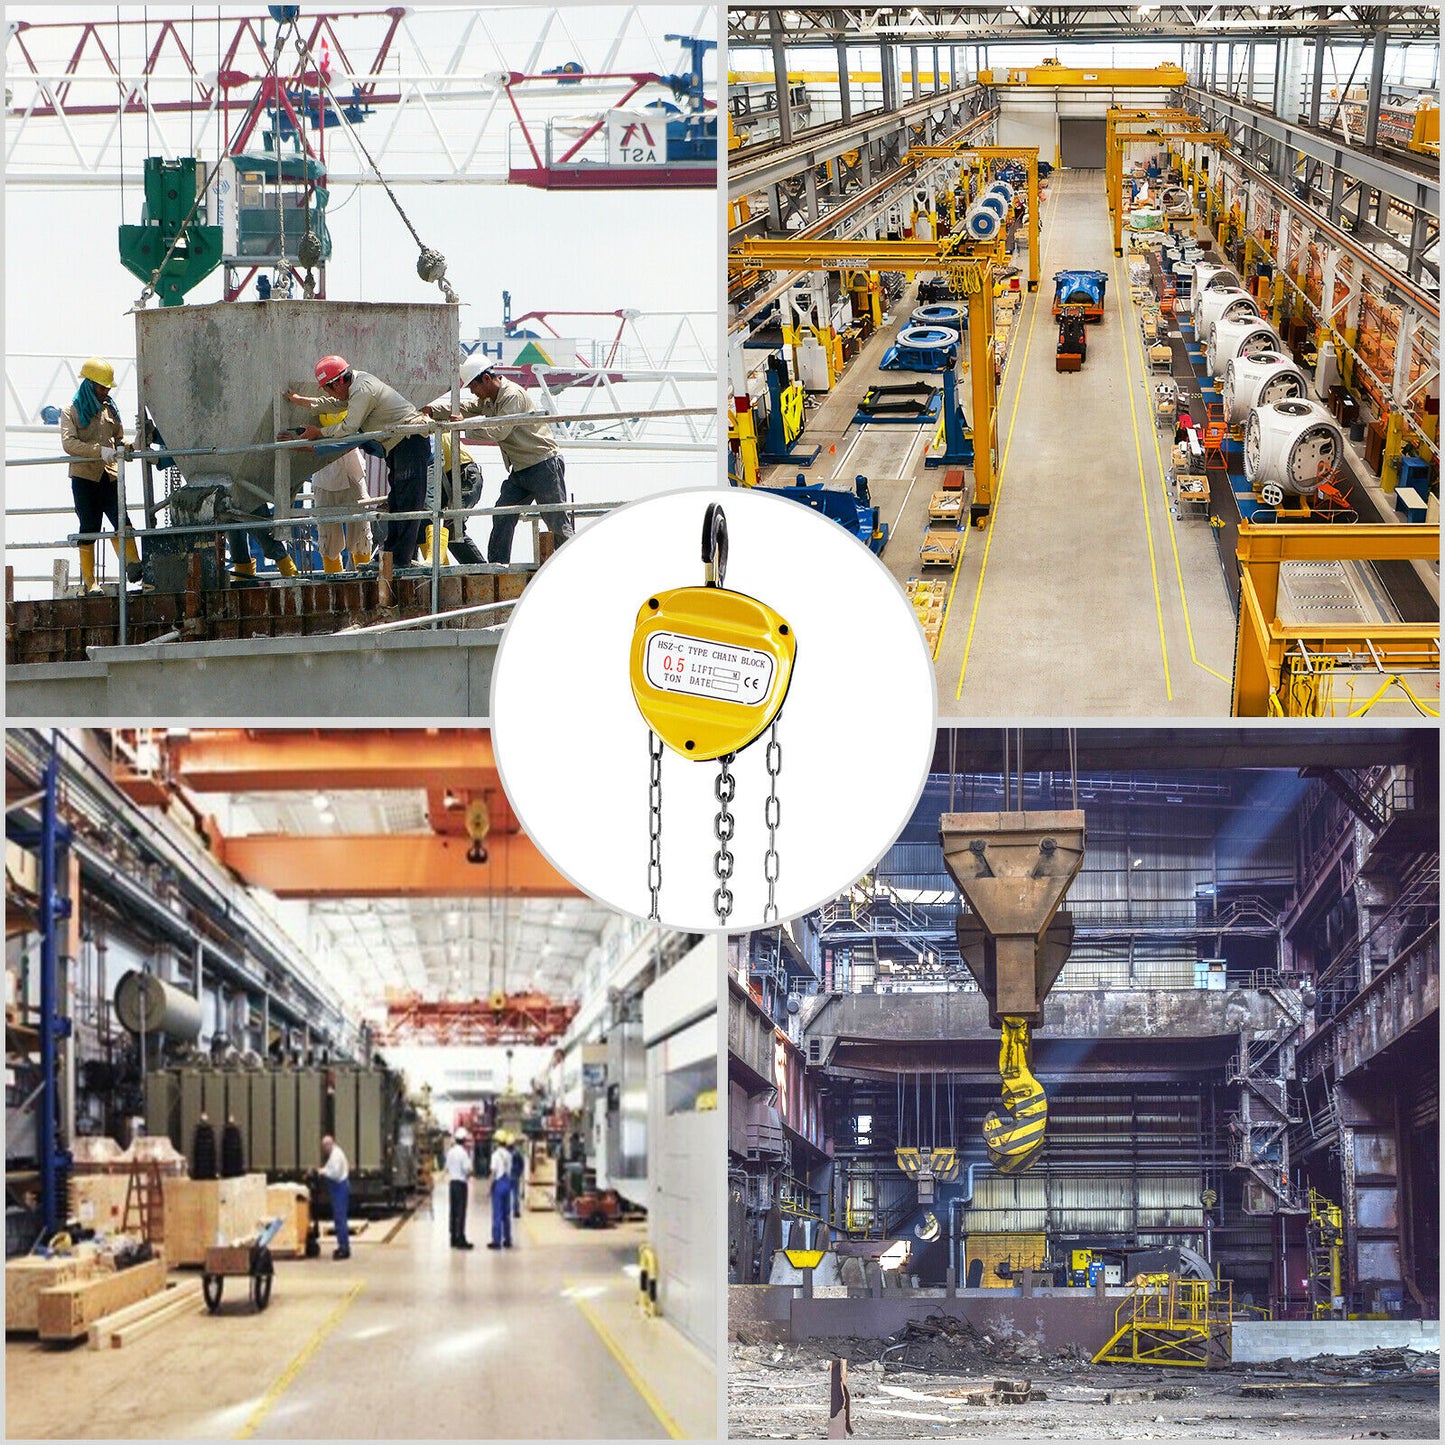 Anti-rust manual chain hoist with two hooks for lifting and pulling, 10-20FT/3-6m, available in 0.5-3T.